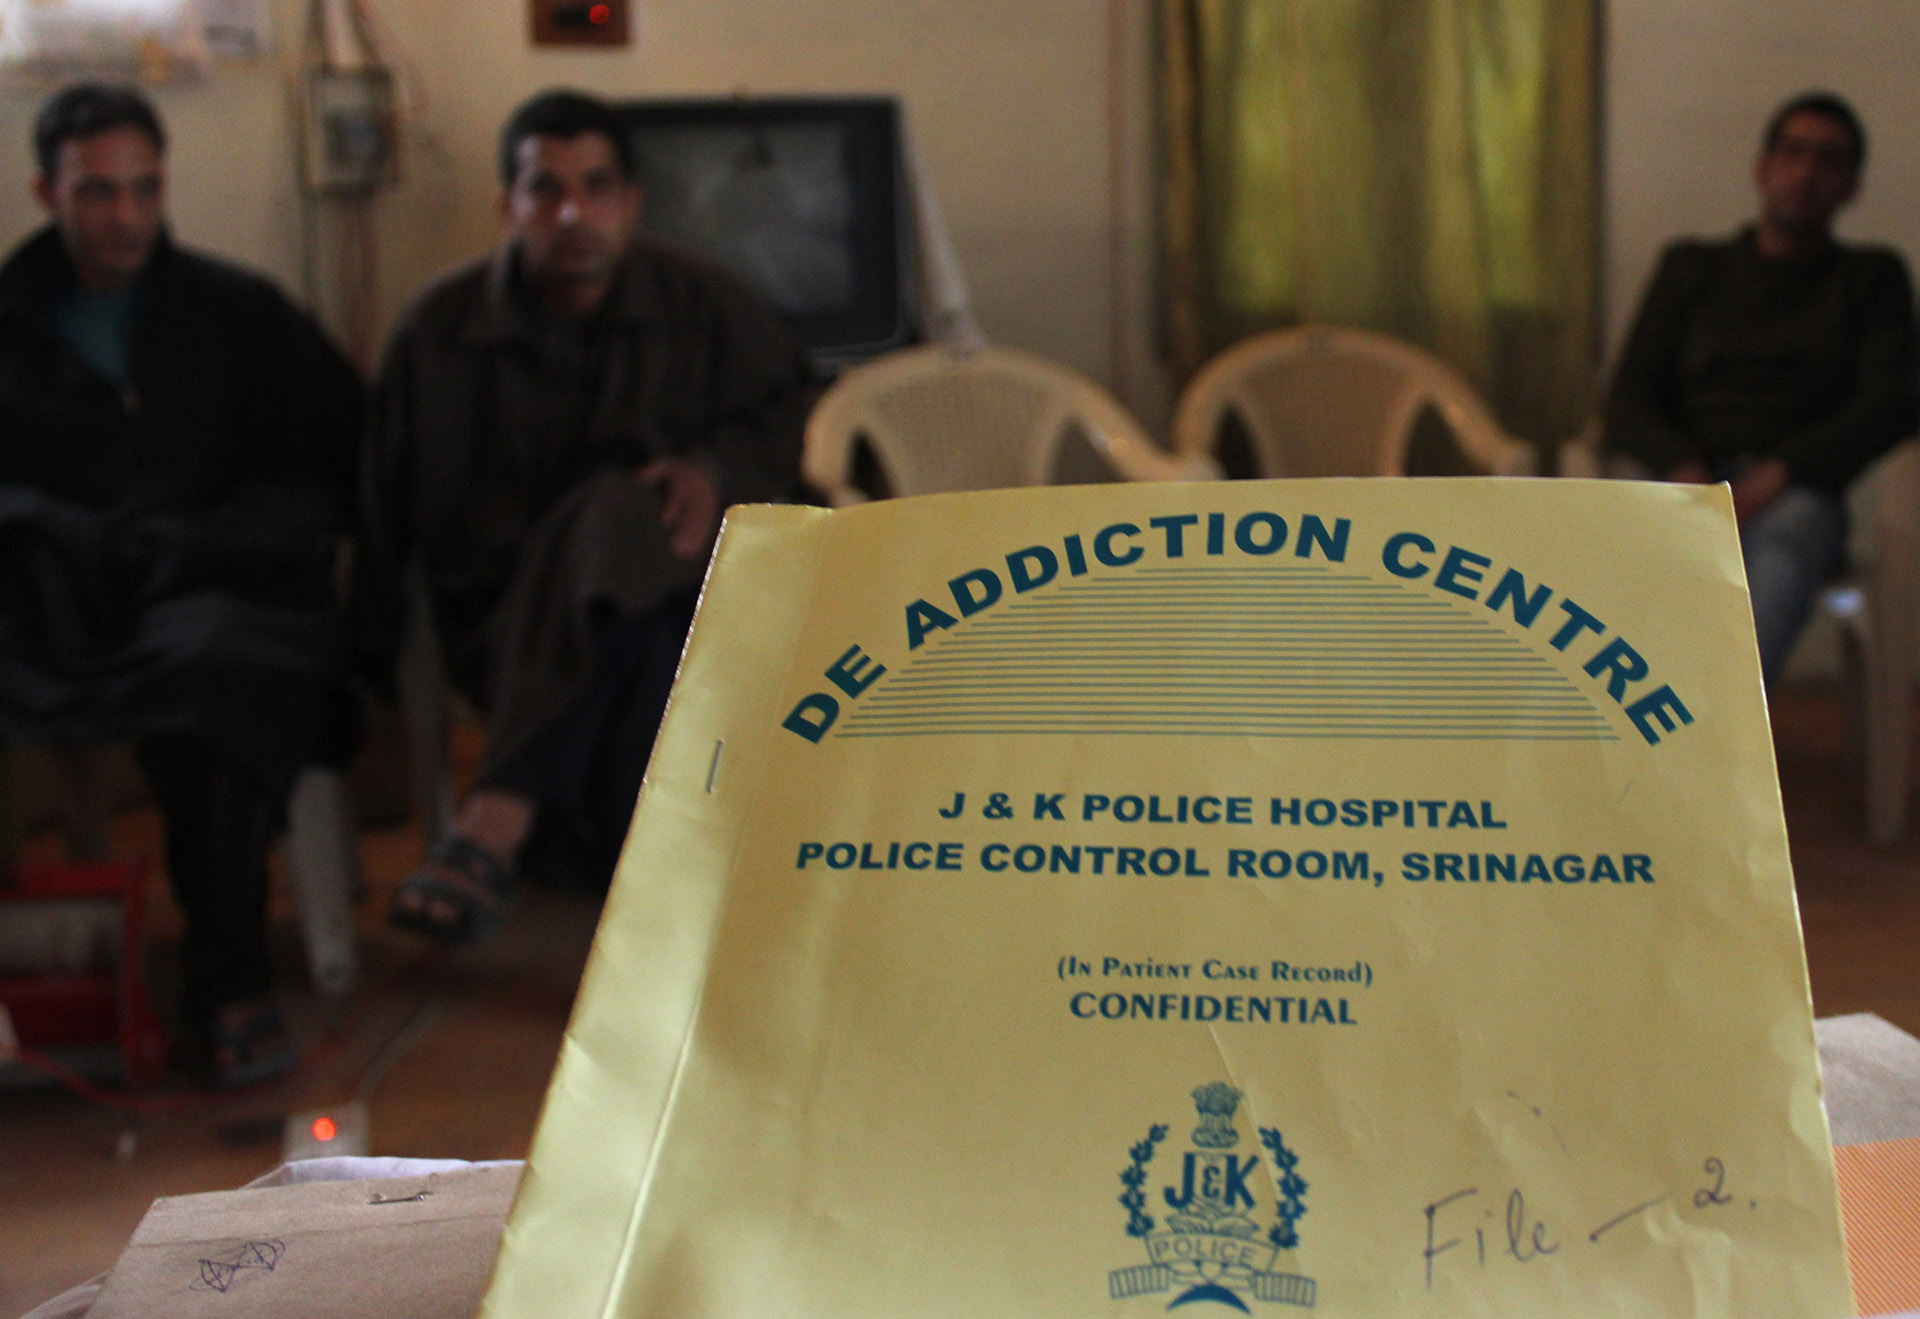 Kashmir’s healthcare system is struggling to cope with a mounting heroin epidemic